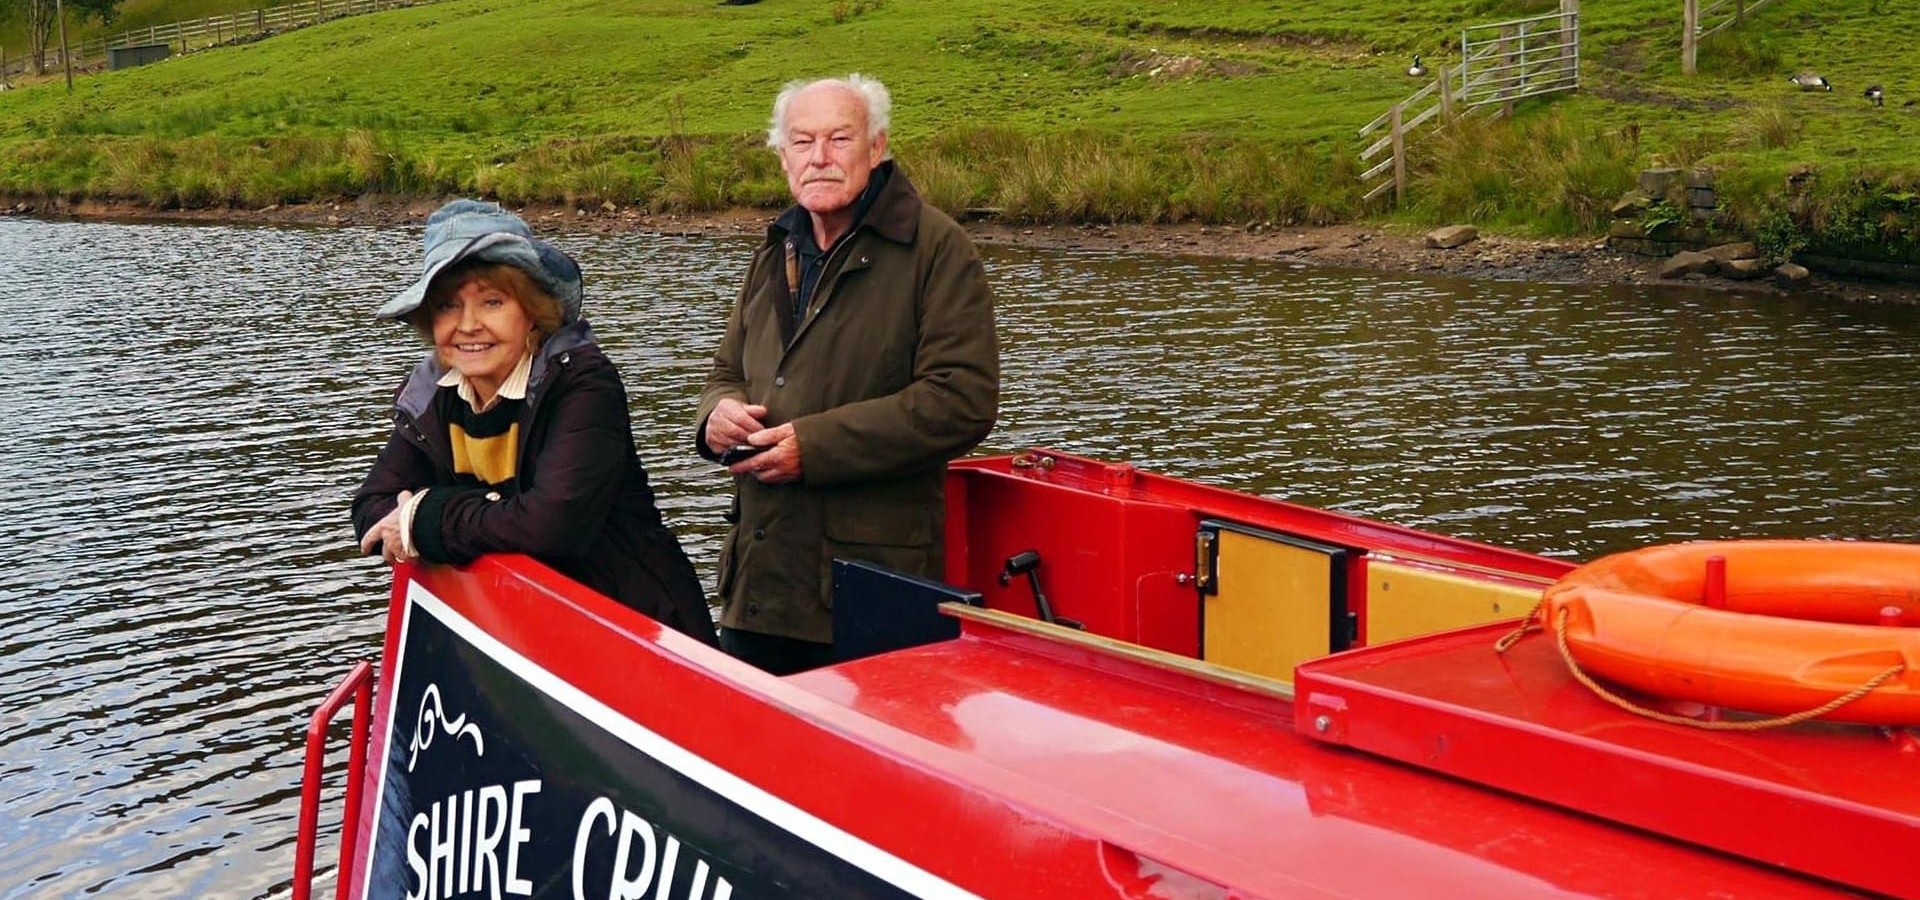 tv show great canal journeys